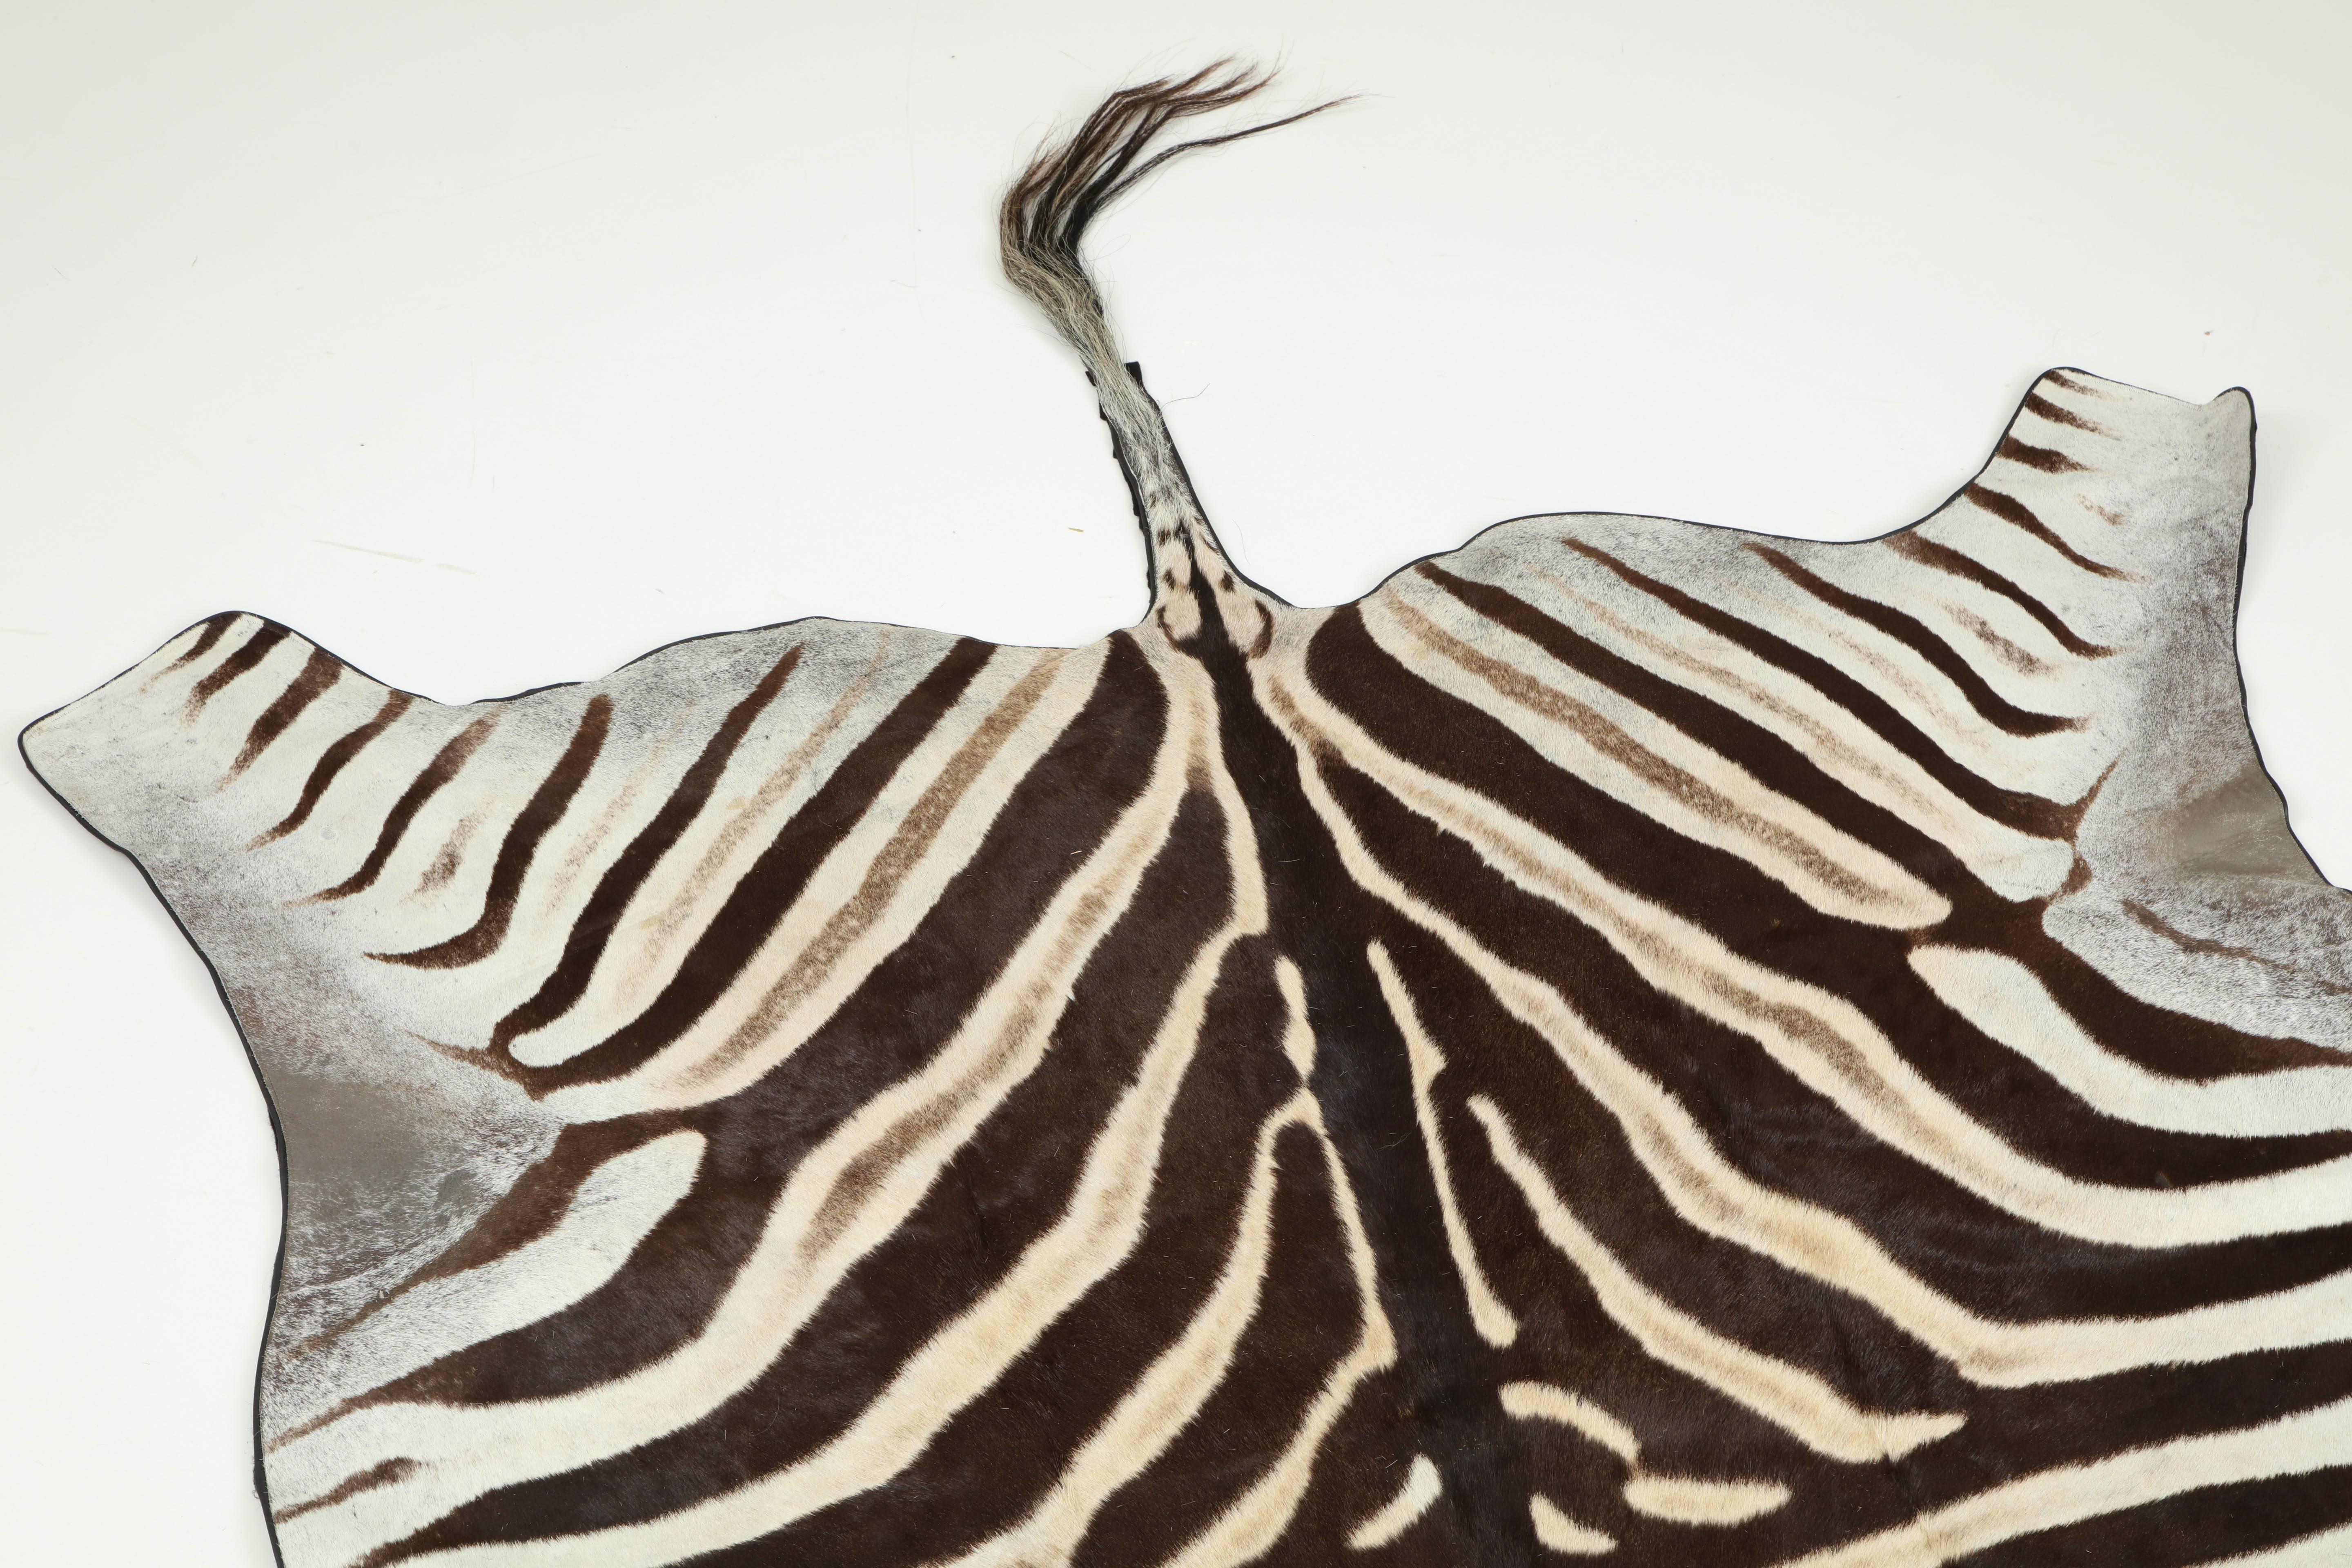 Hand-Crafted Rug, Zebra Hide, Backed with Leather Trim